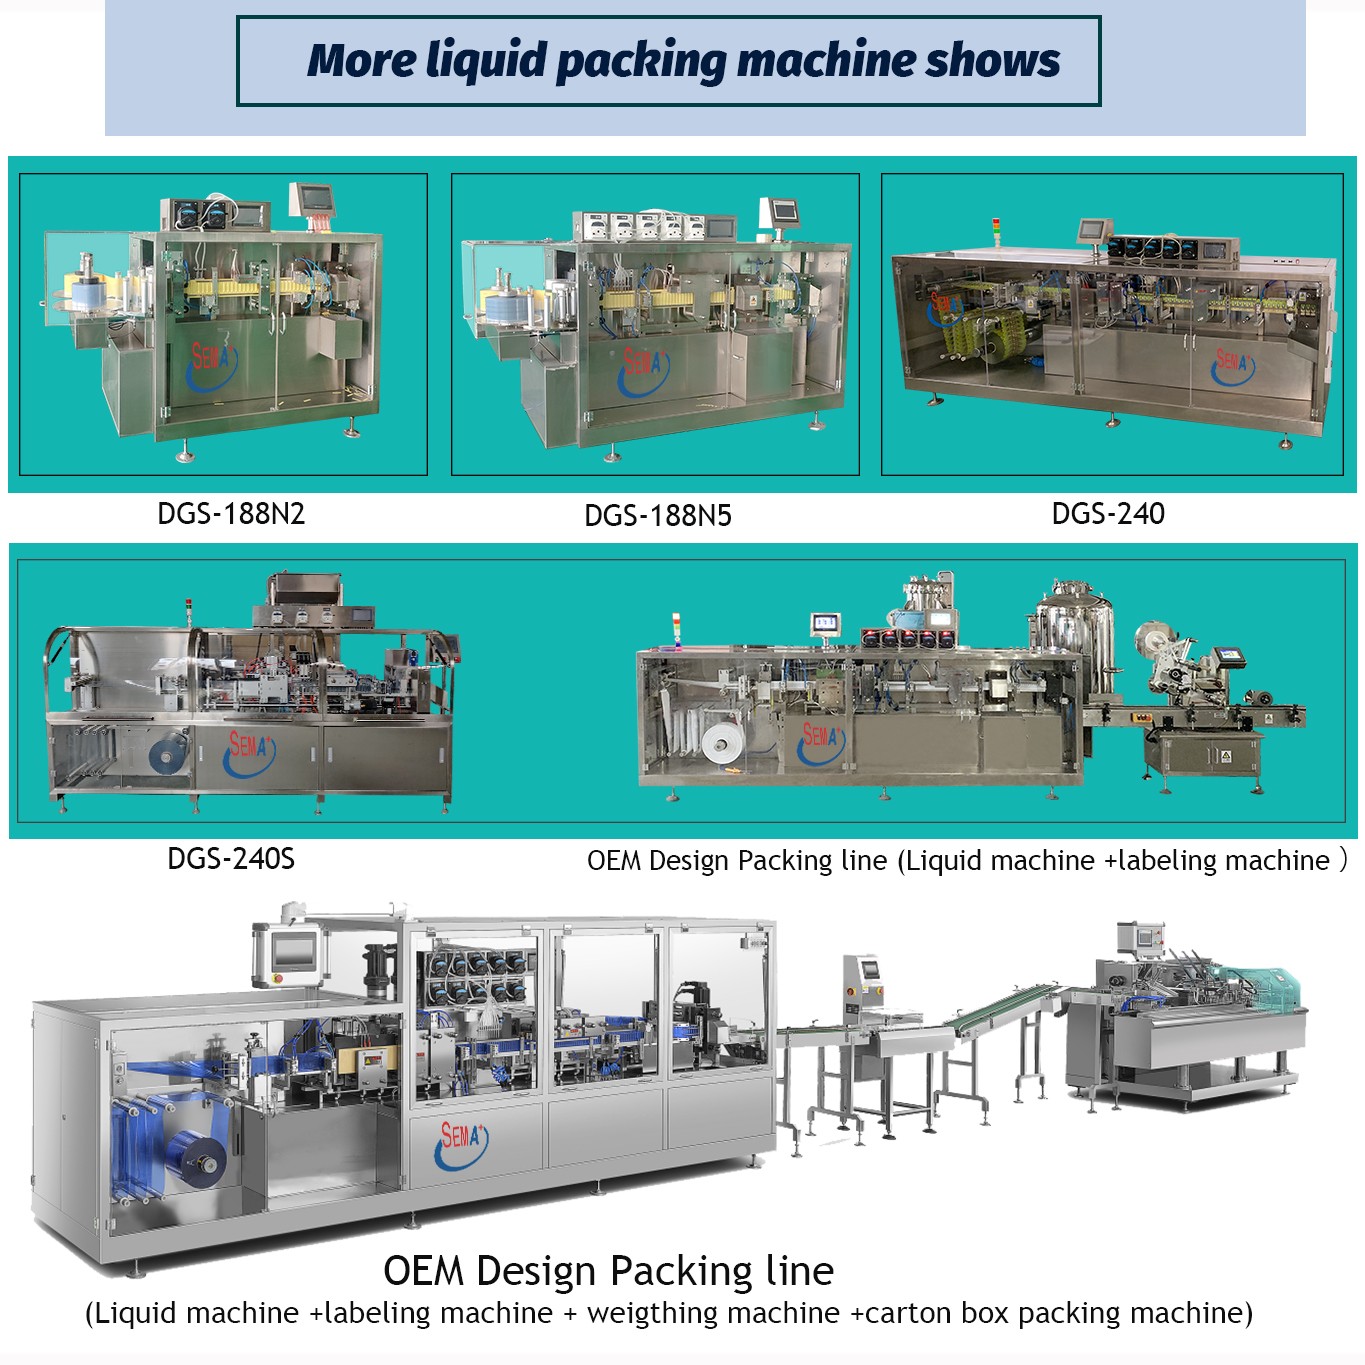 automatic olive oil packing machine forming filling sealing 14ml organ oil packaging machine